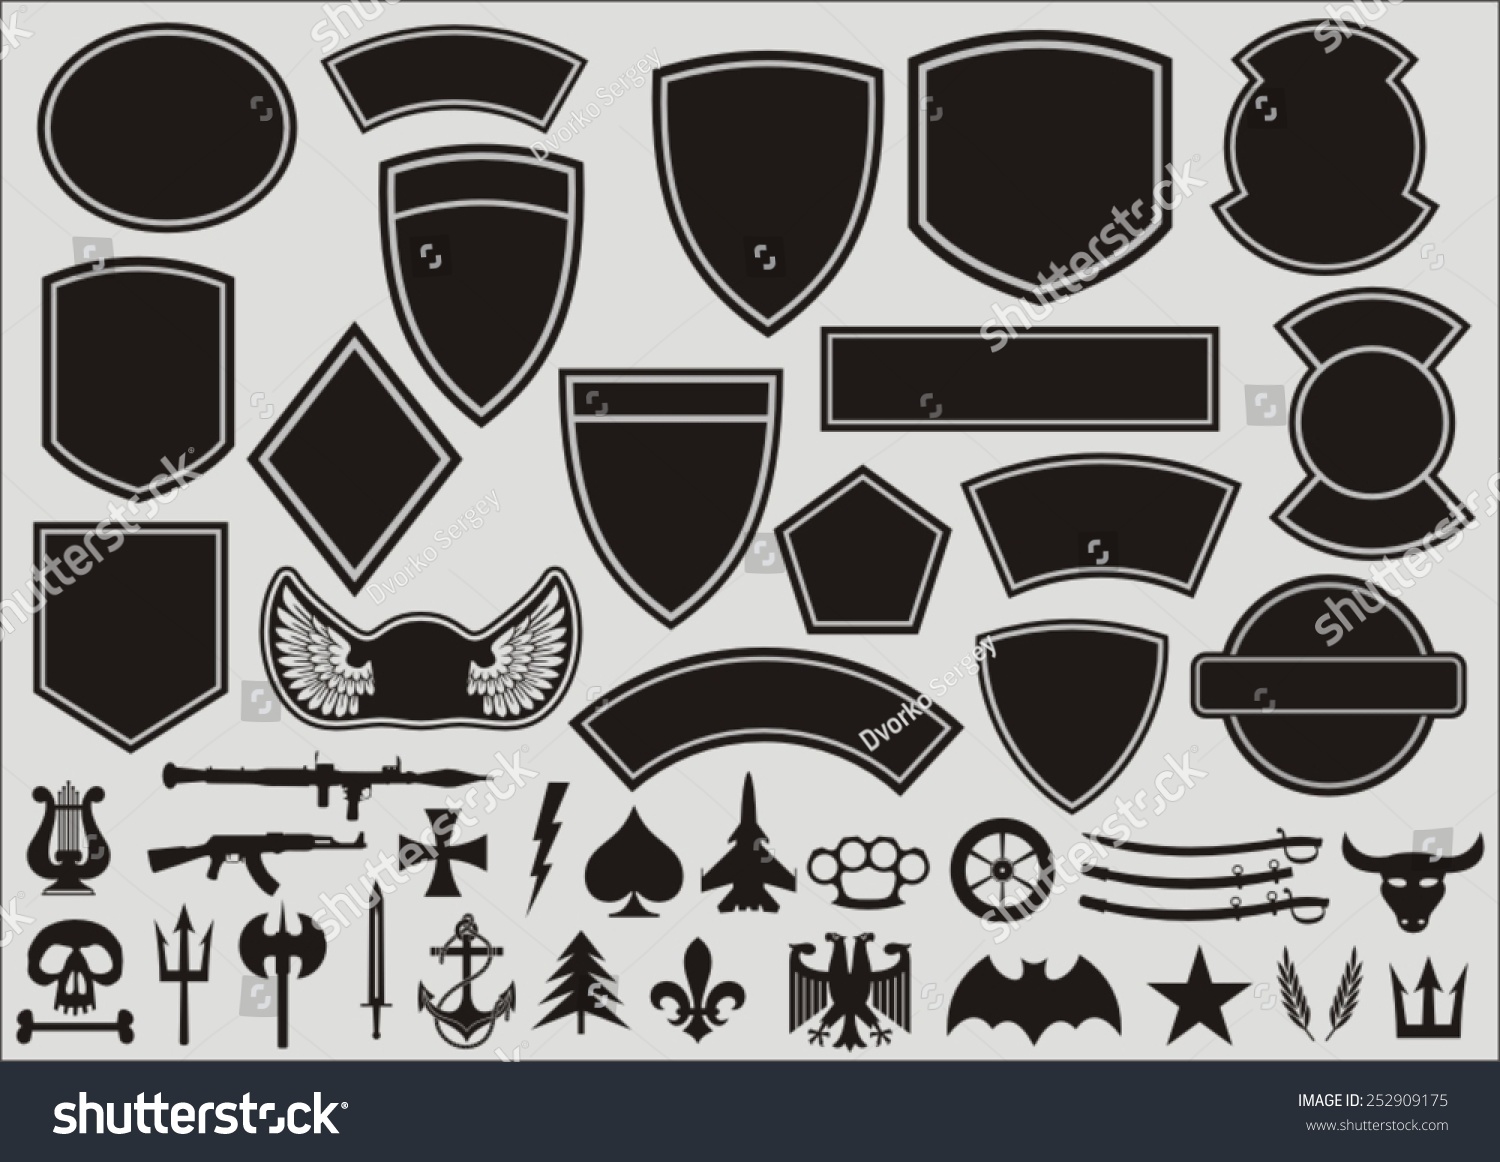 military patches clipart free - photo #47